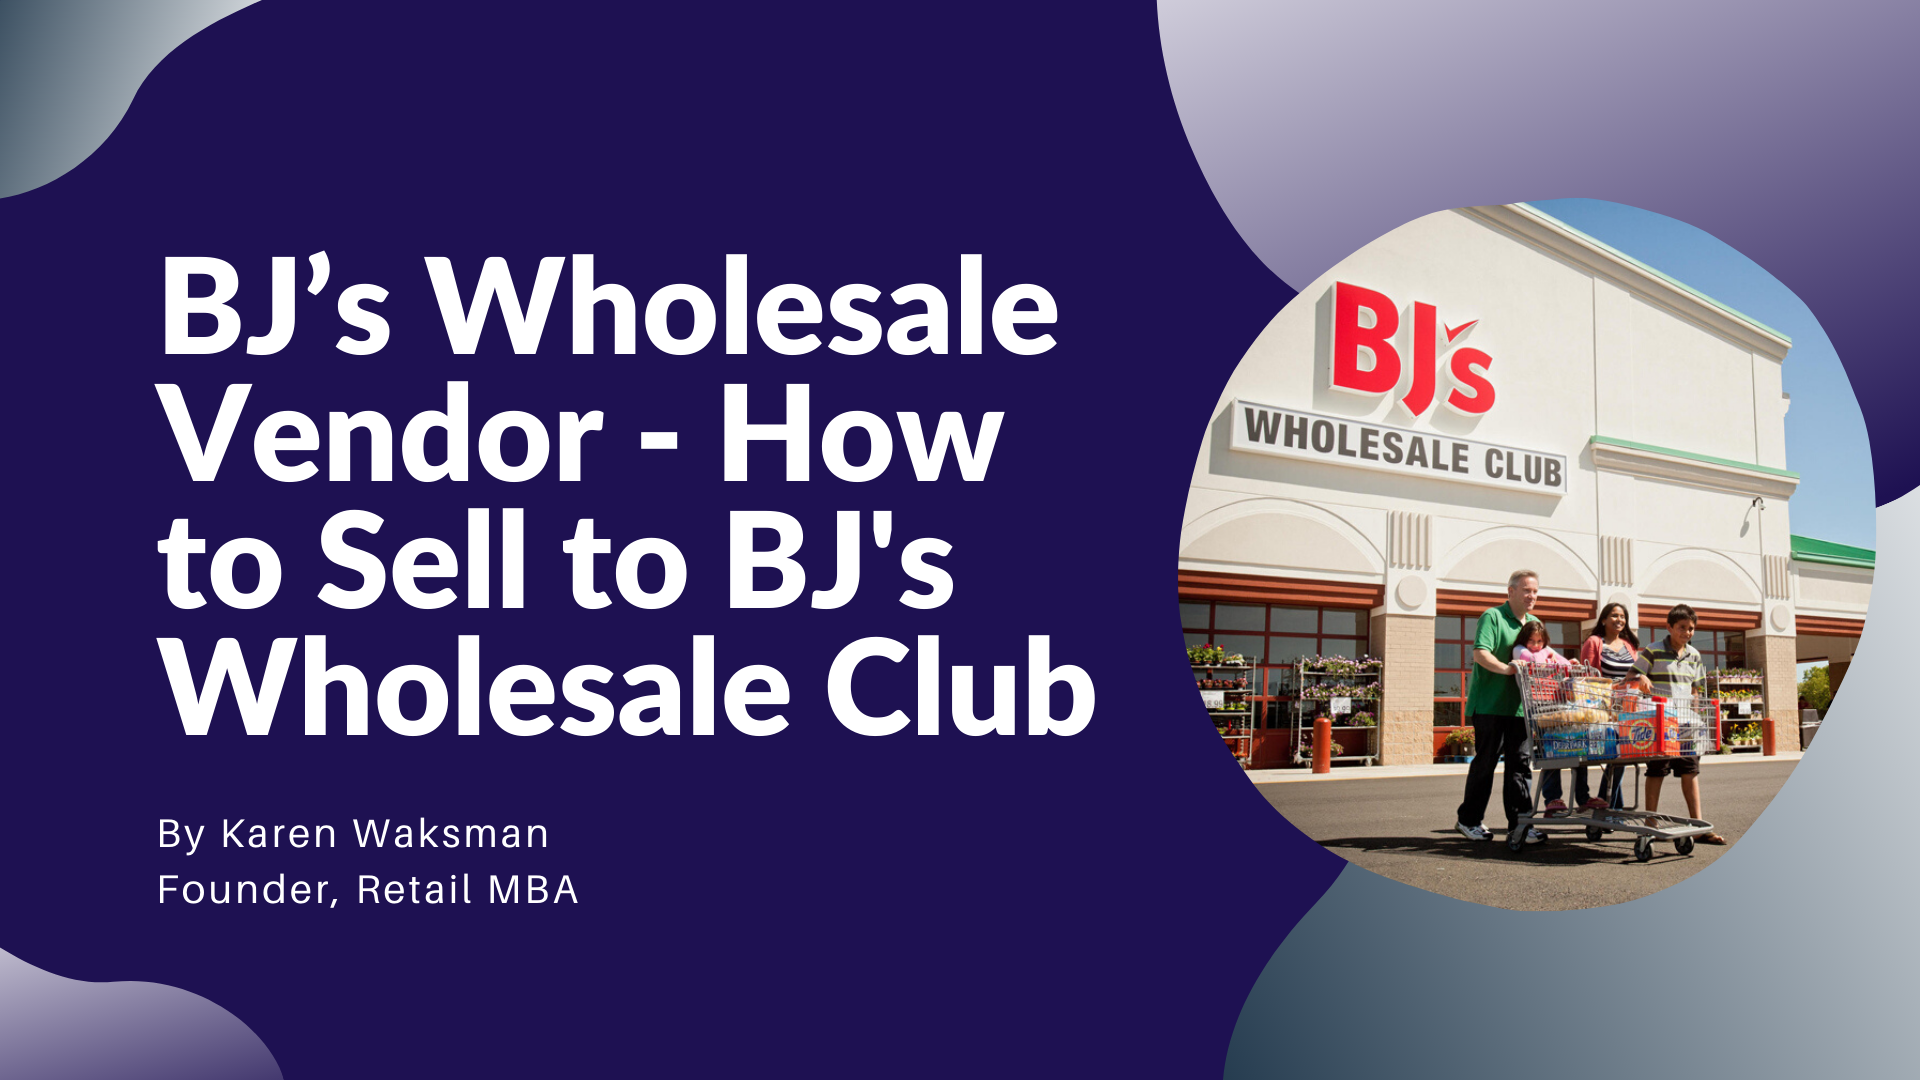 Bjs Wholesale Vendor How To Sell To Bj S Wholesale Club